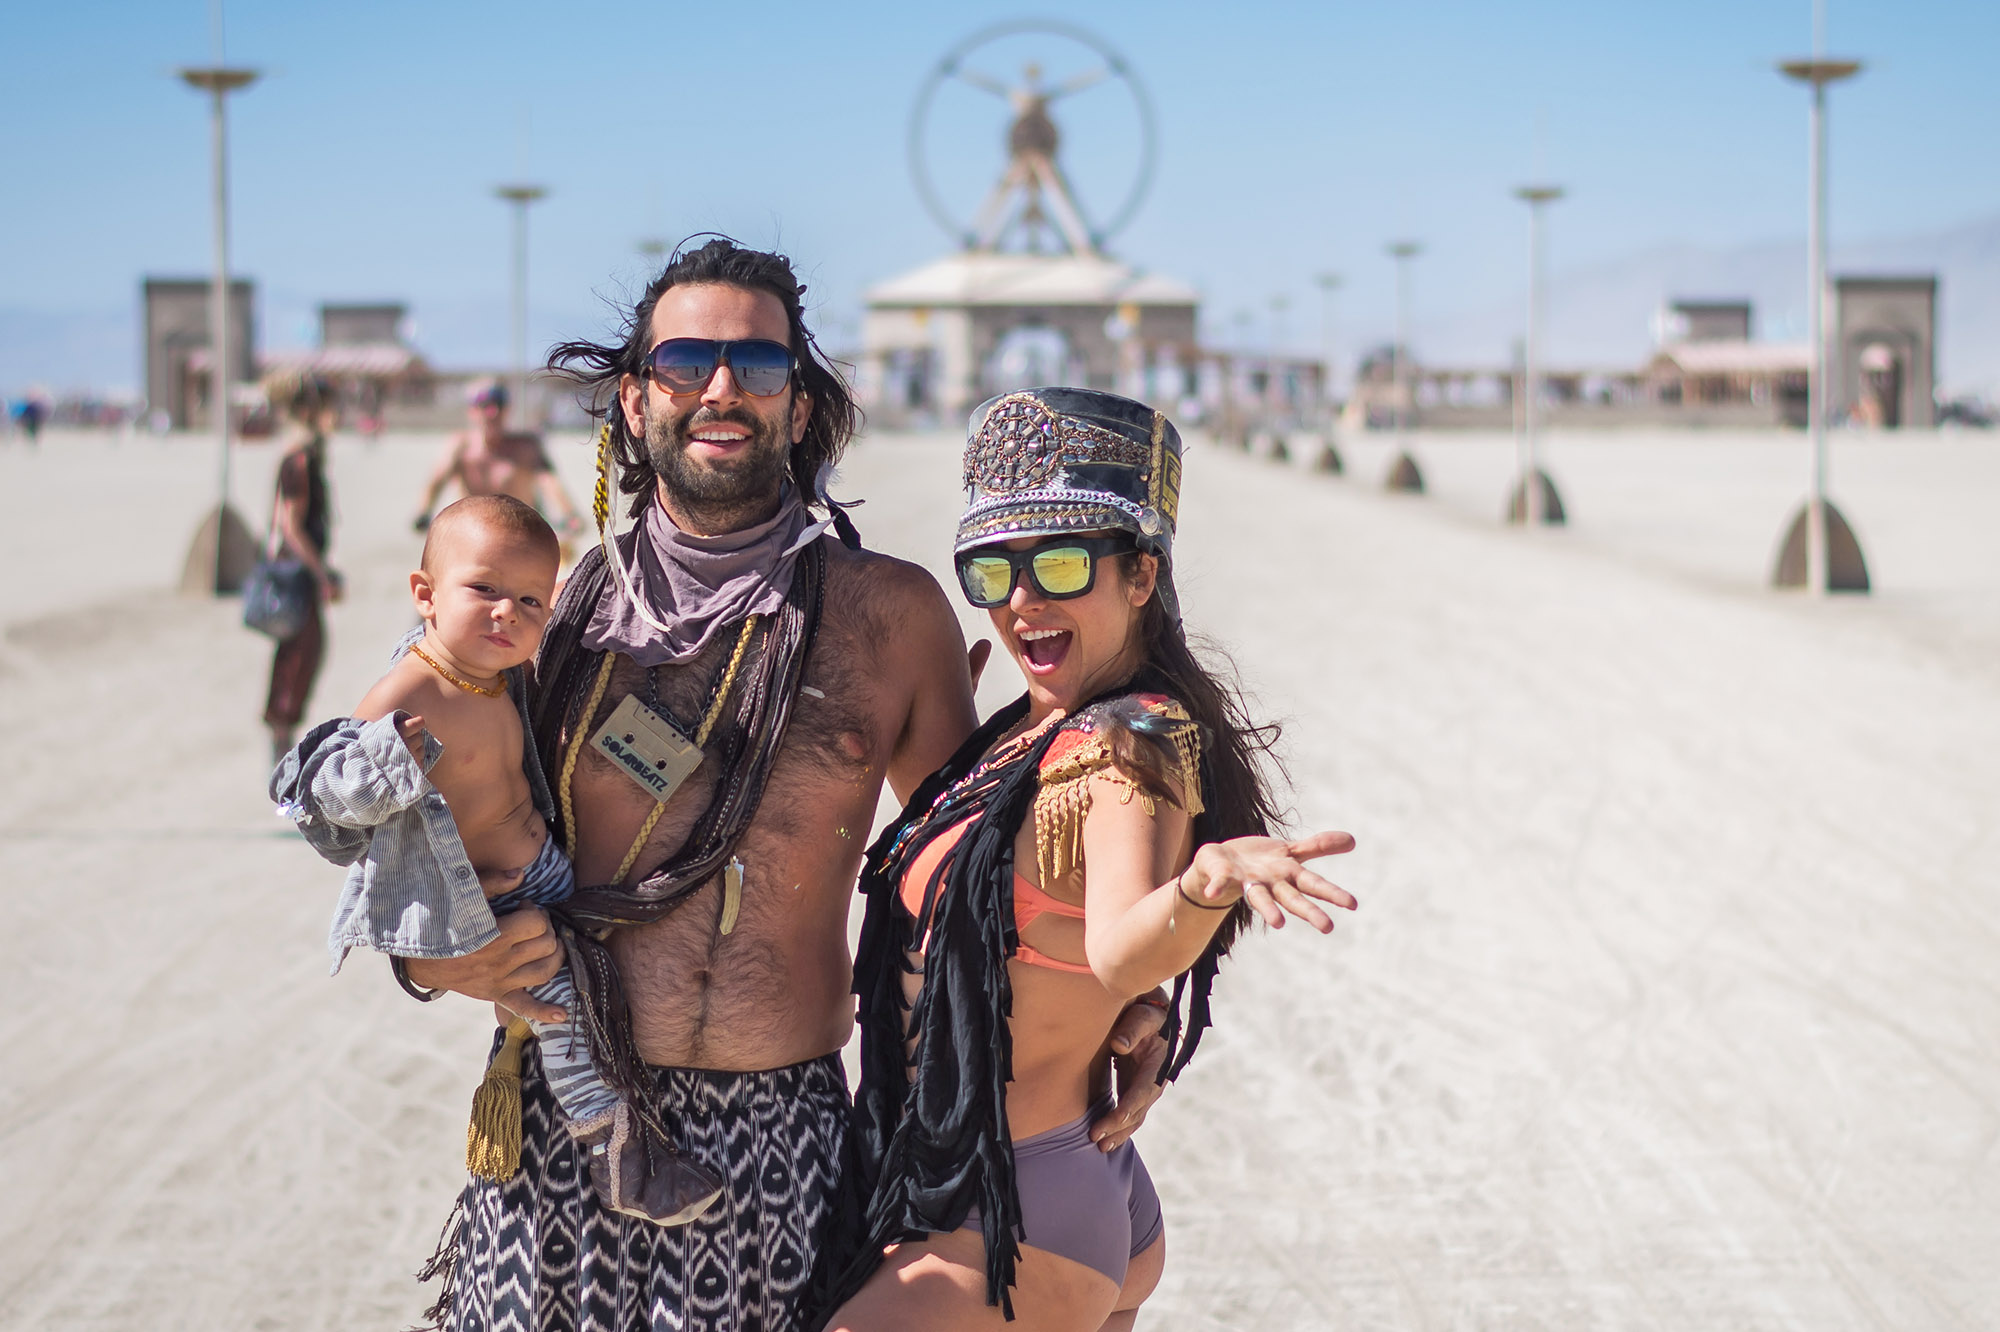 dave bigham recommends Burning Man Naked Video